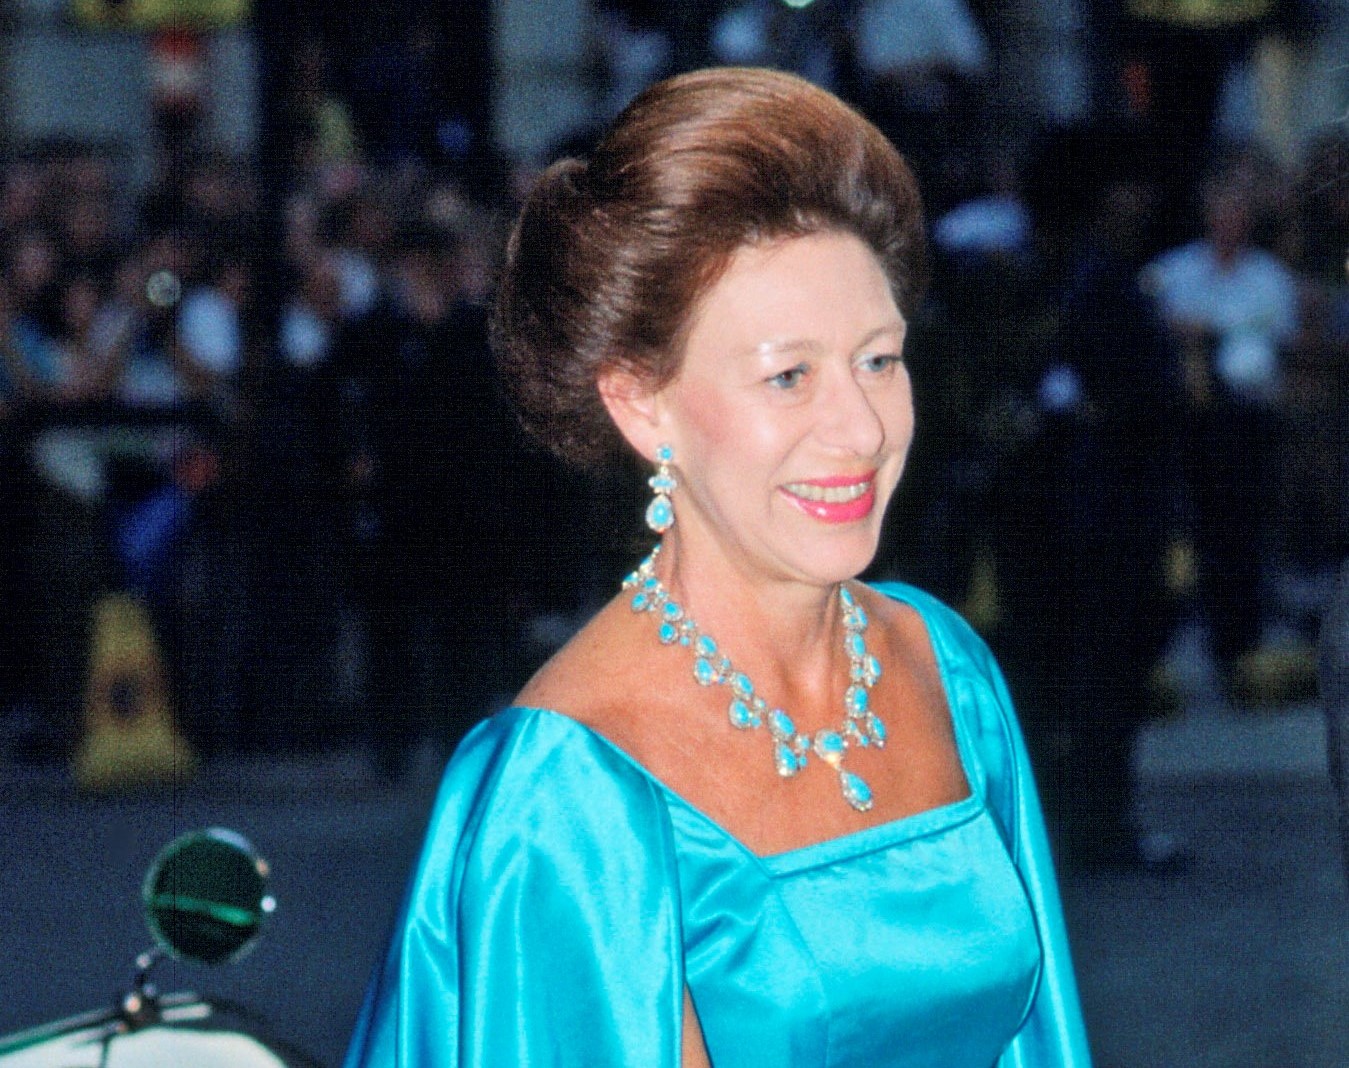 Princess Margaret Insisted All Her Friends Call Her This Nickname She Made up for Herself